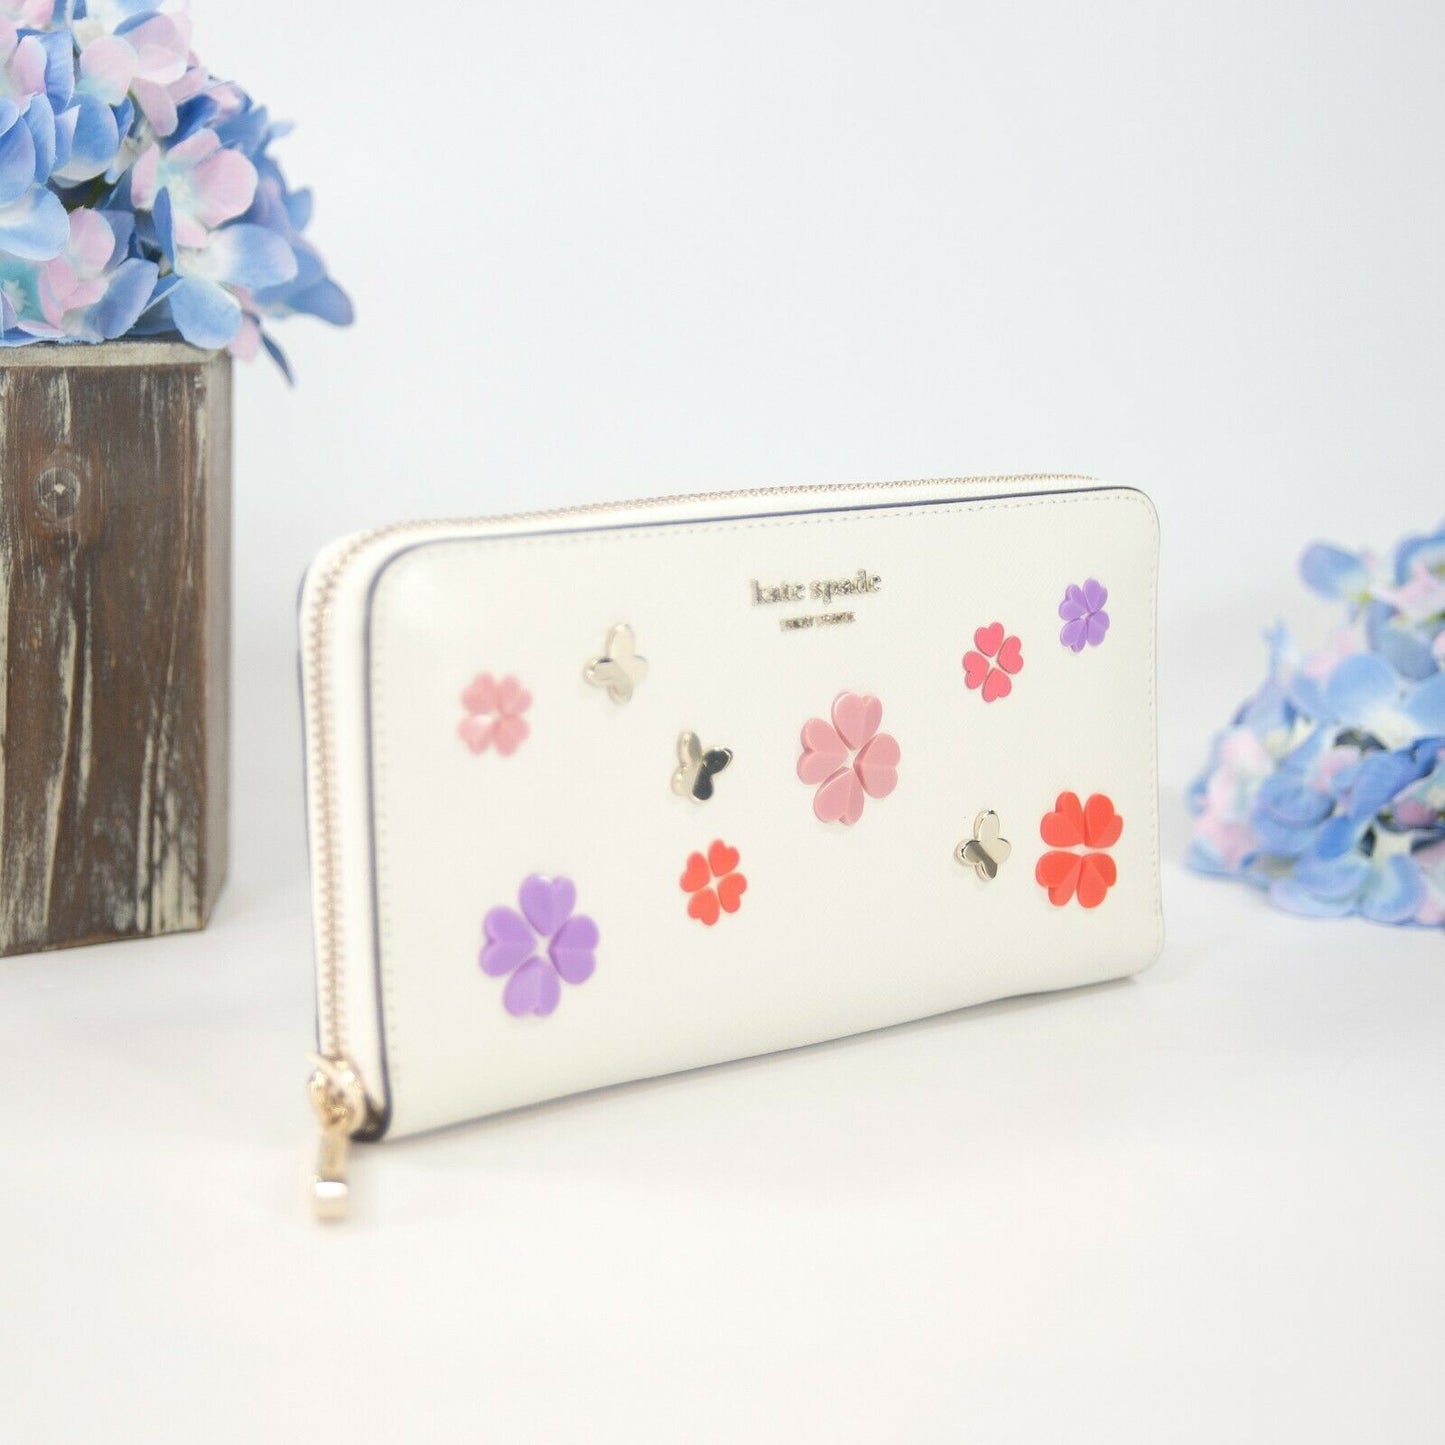 Kate Spade Ivory Leather Spencer Clover Butterfly Zip Around Lacey Wallet NWOT